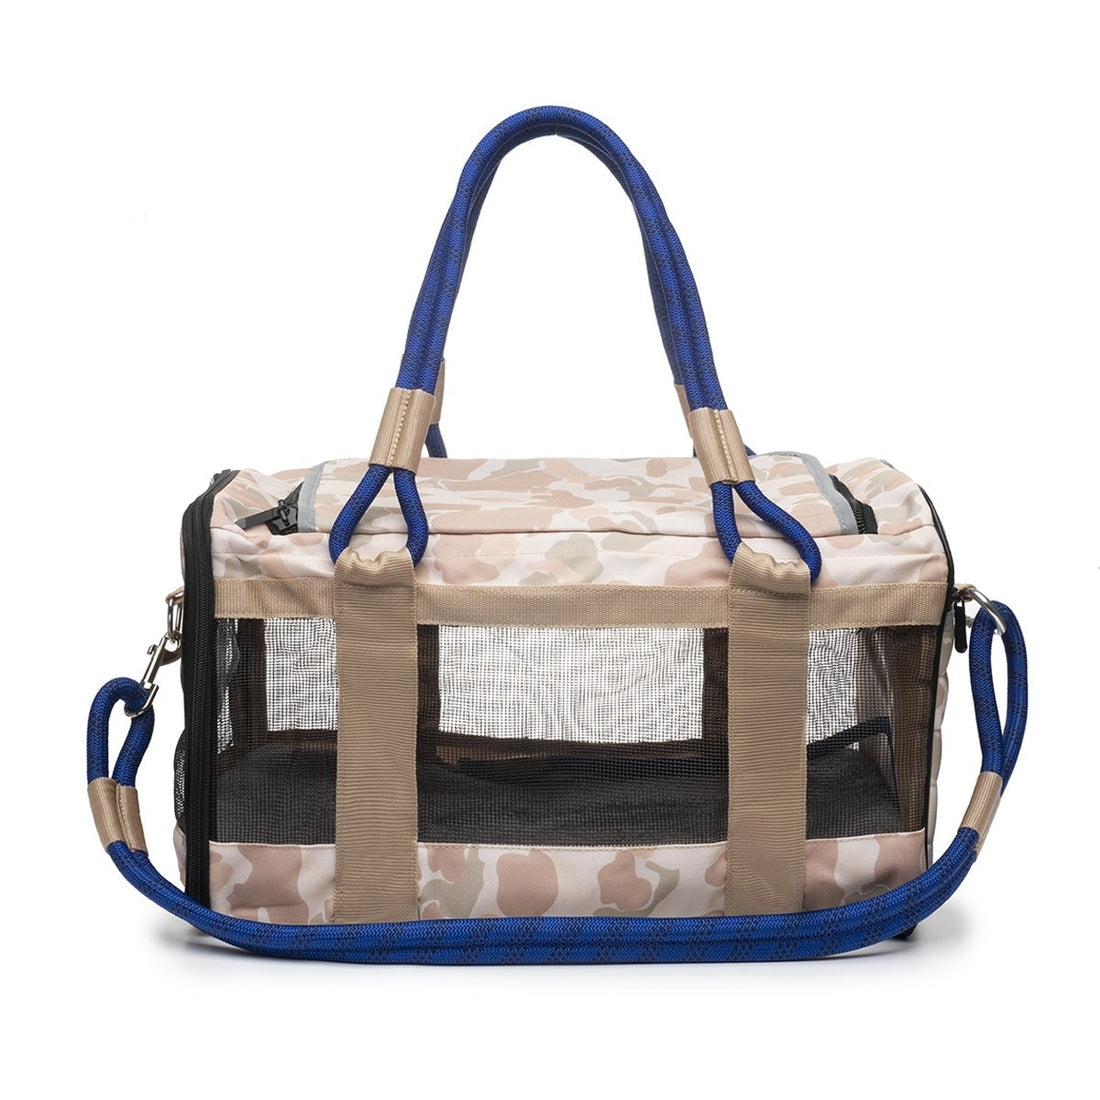 Load image into Gallery viewer, Roverlund Out-of-Office Pet Carrier Desert Camo (w/ Blue) Image
